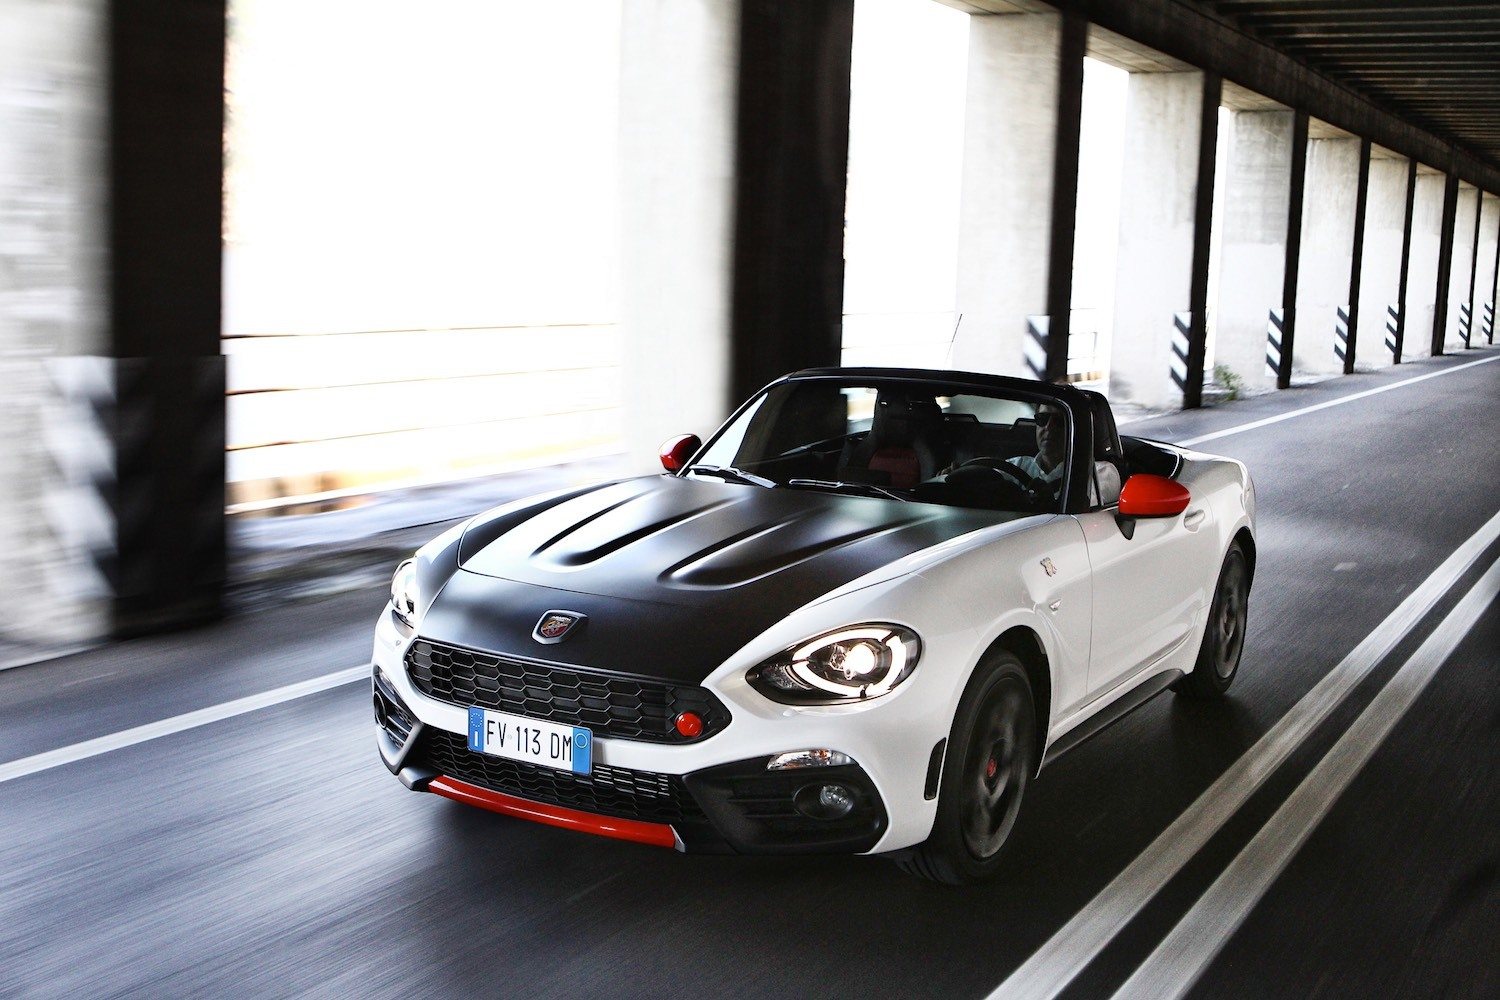 Jonathan Humphrey reviews the Abarth 124 Spider for Drive 9